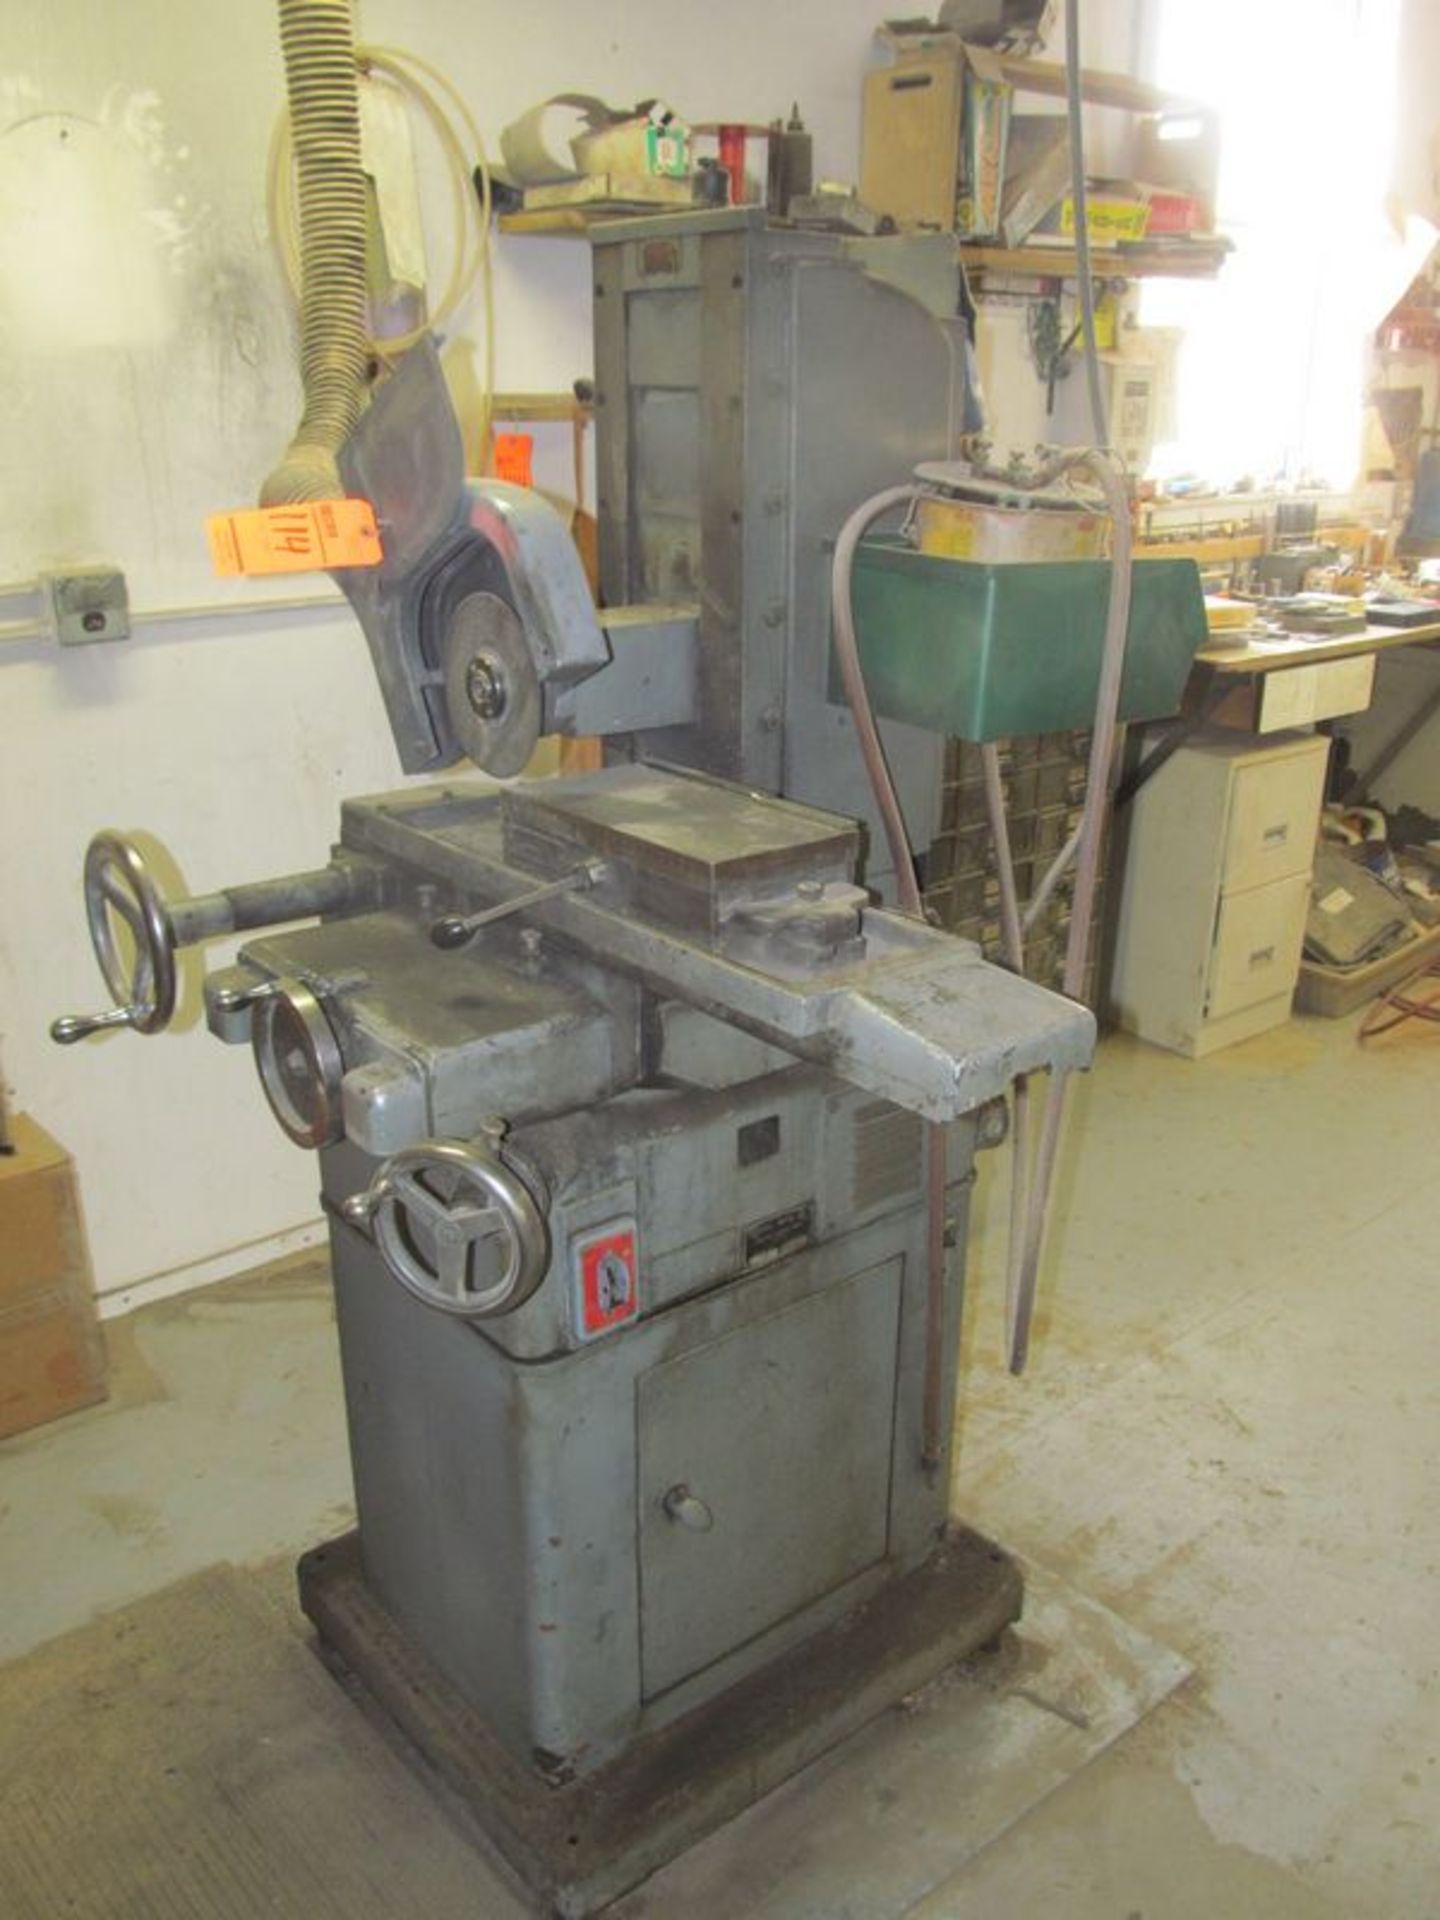 Covel surface grinder, M/N Style 7A, S/N 7A-6111, with 6" X 12" Ceramax magnetic chuck